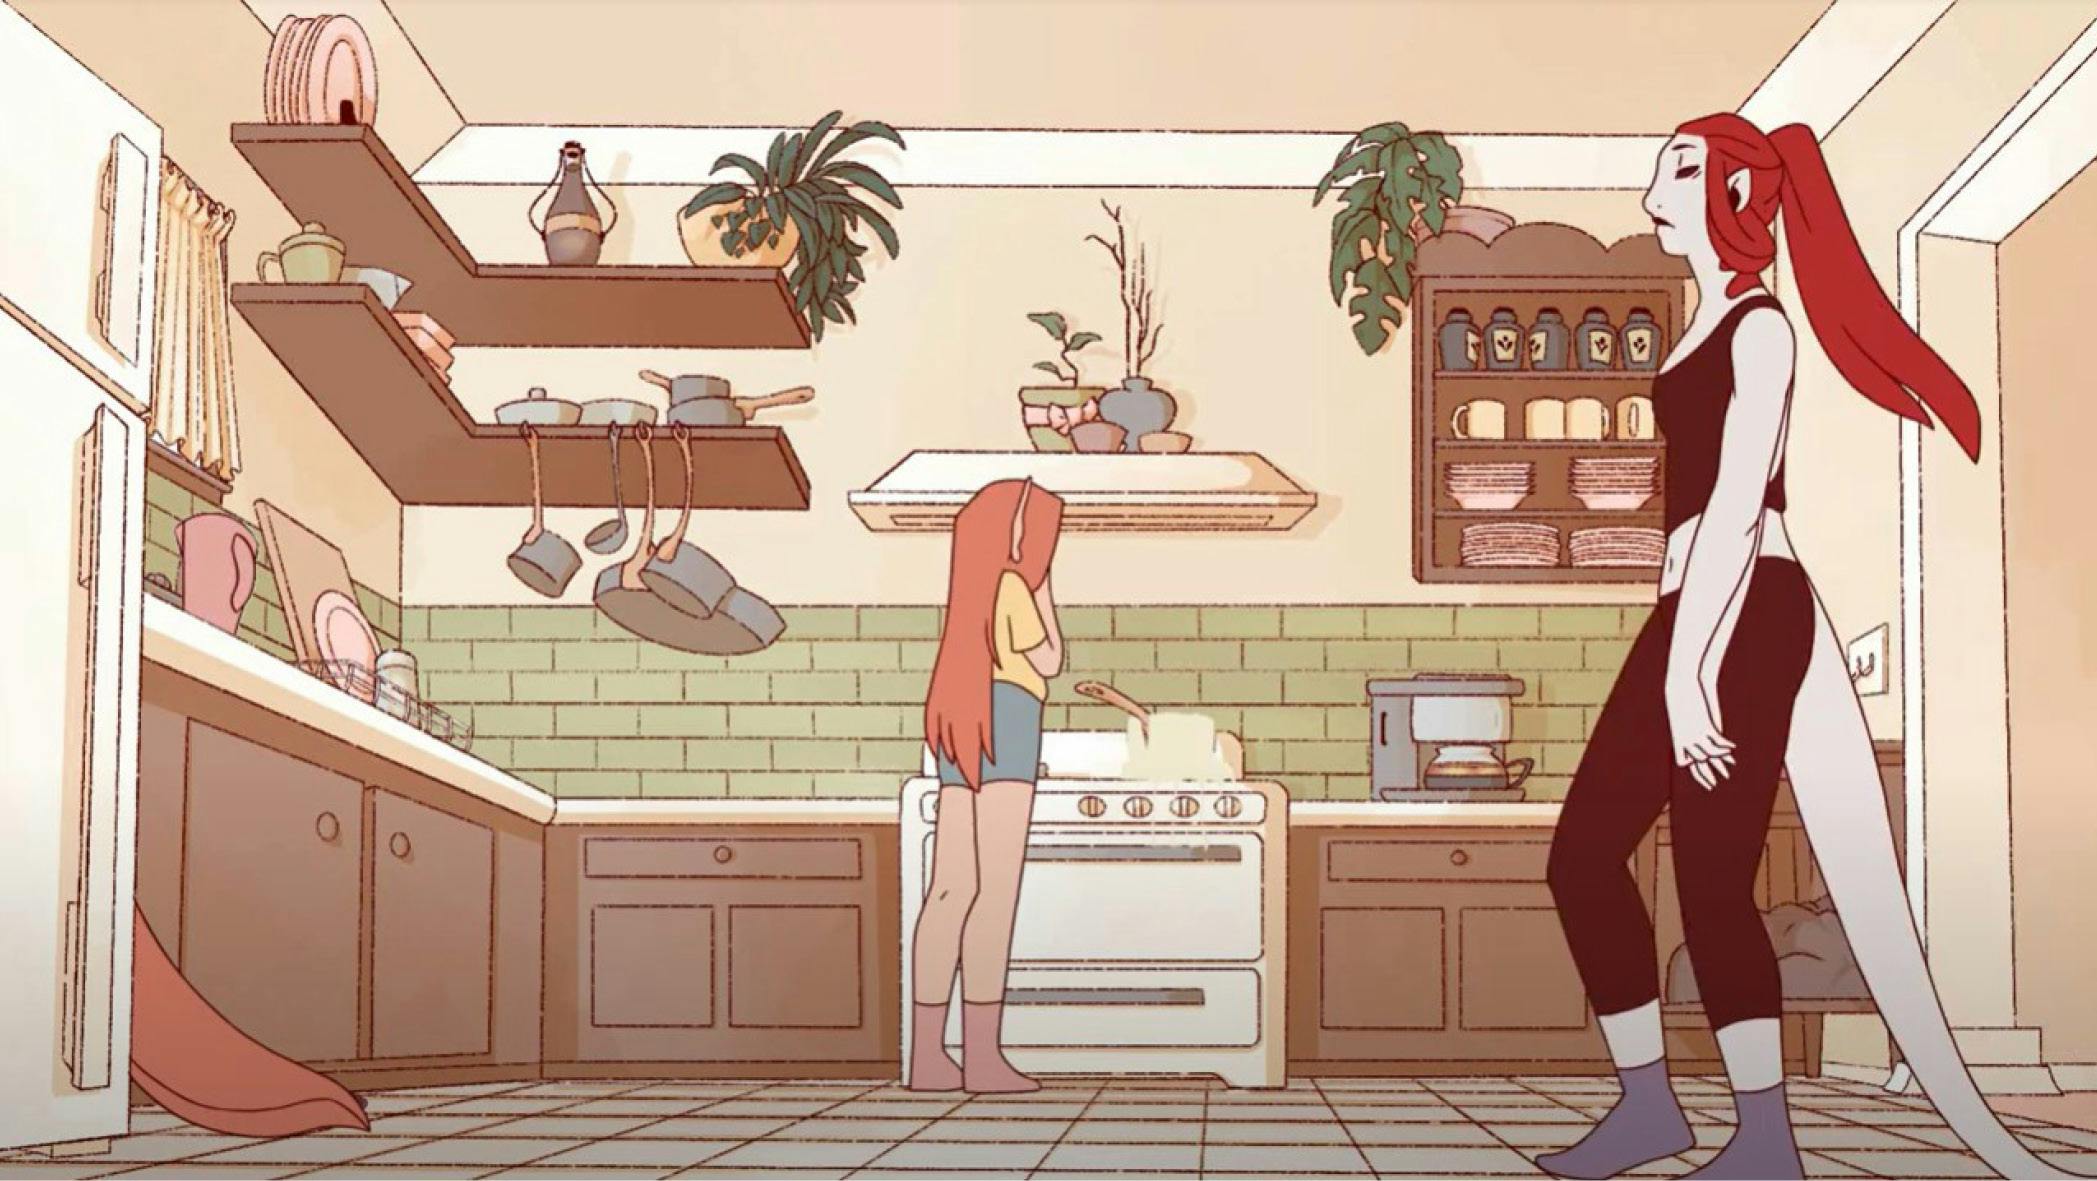 2D illustration of characters in a kitchen